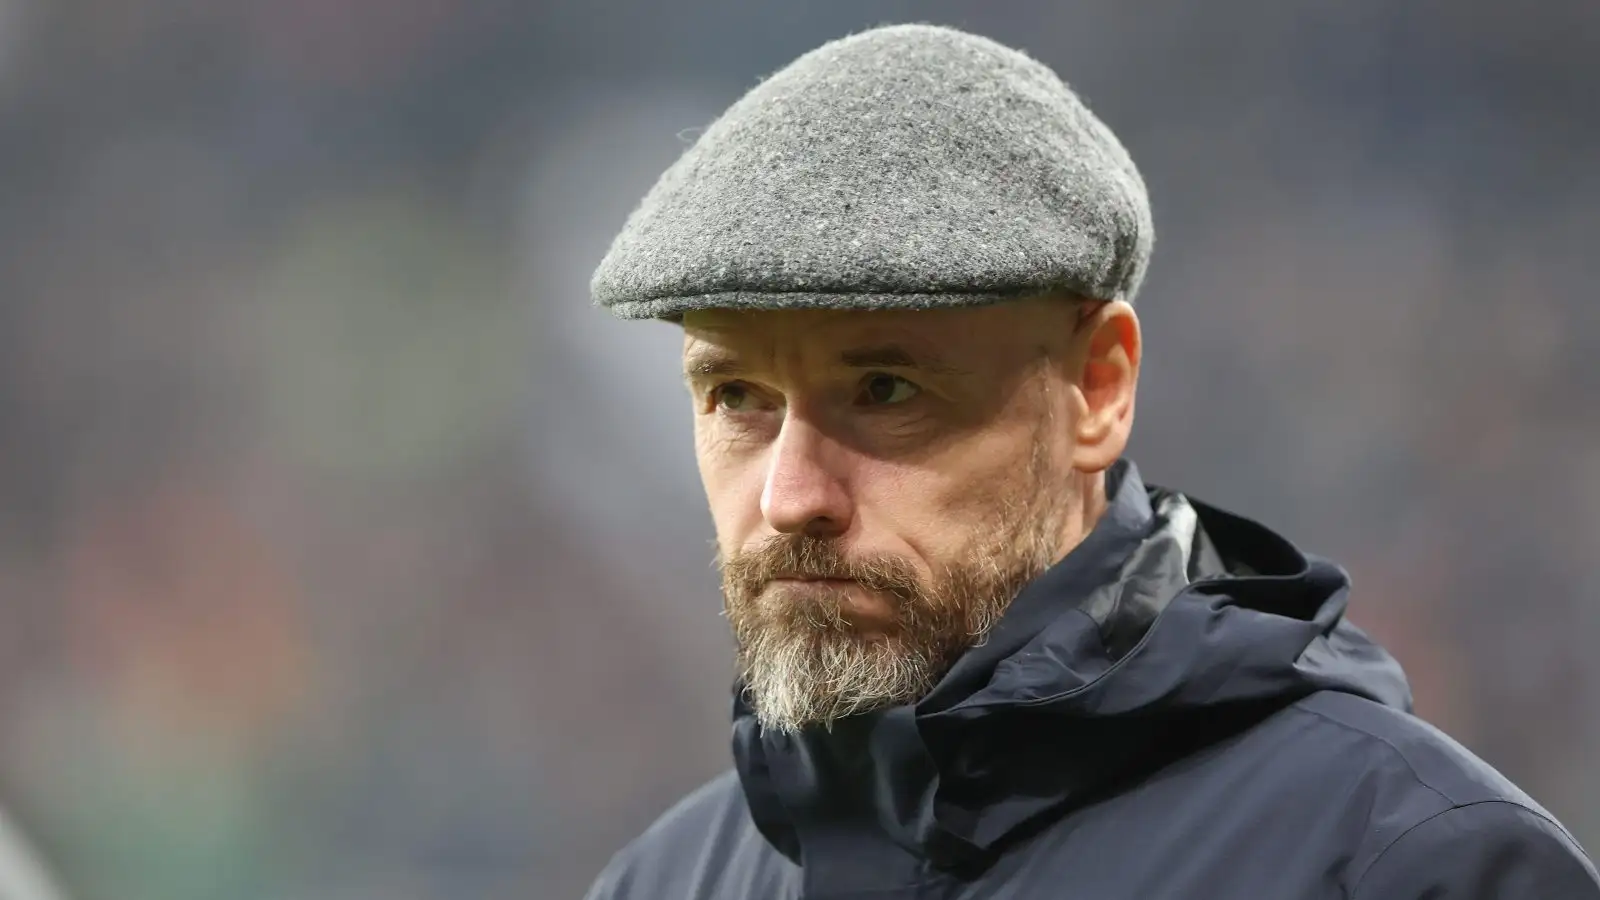 Ten Hag told he’s got ‘no control’ at Man Utd with Red Devils boss ‘largely responsible’ for poor season